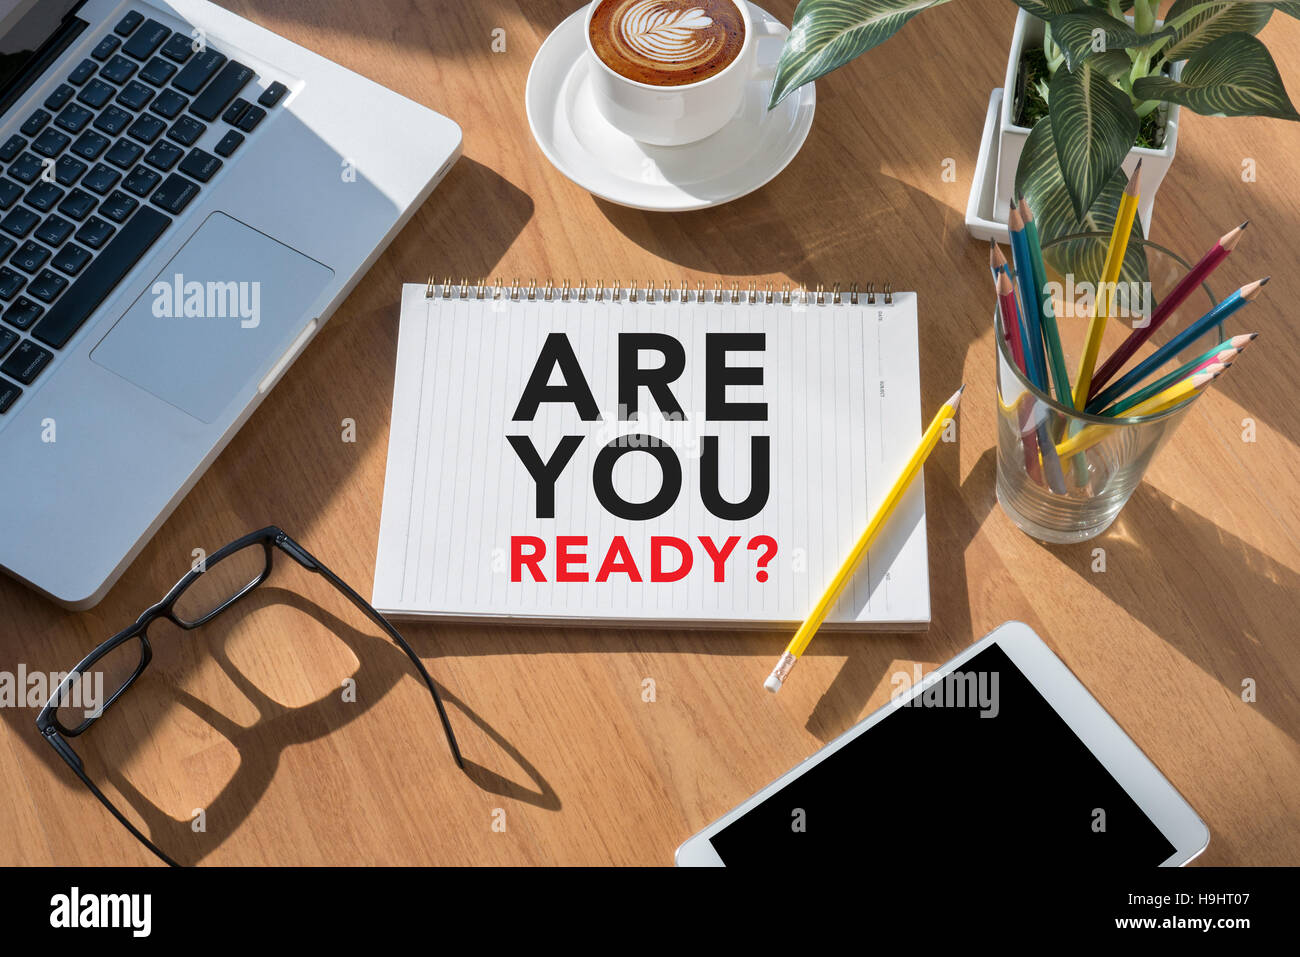 Are You Ready creative sign Stock Photo